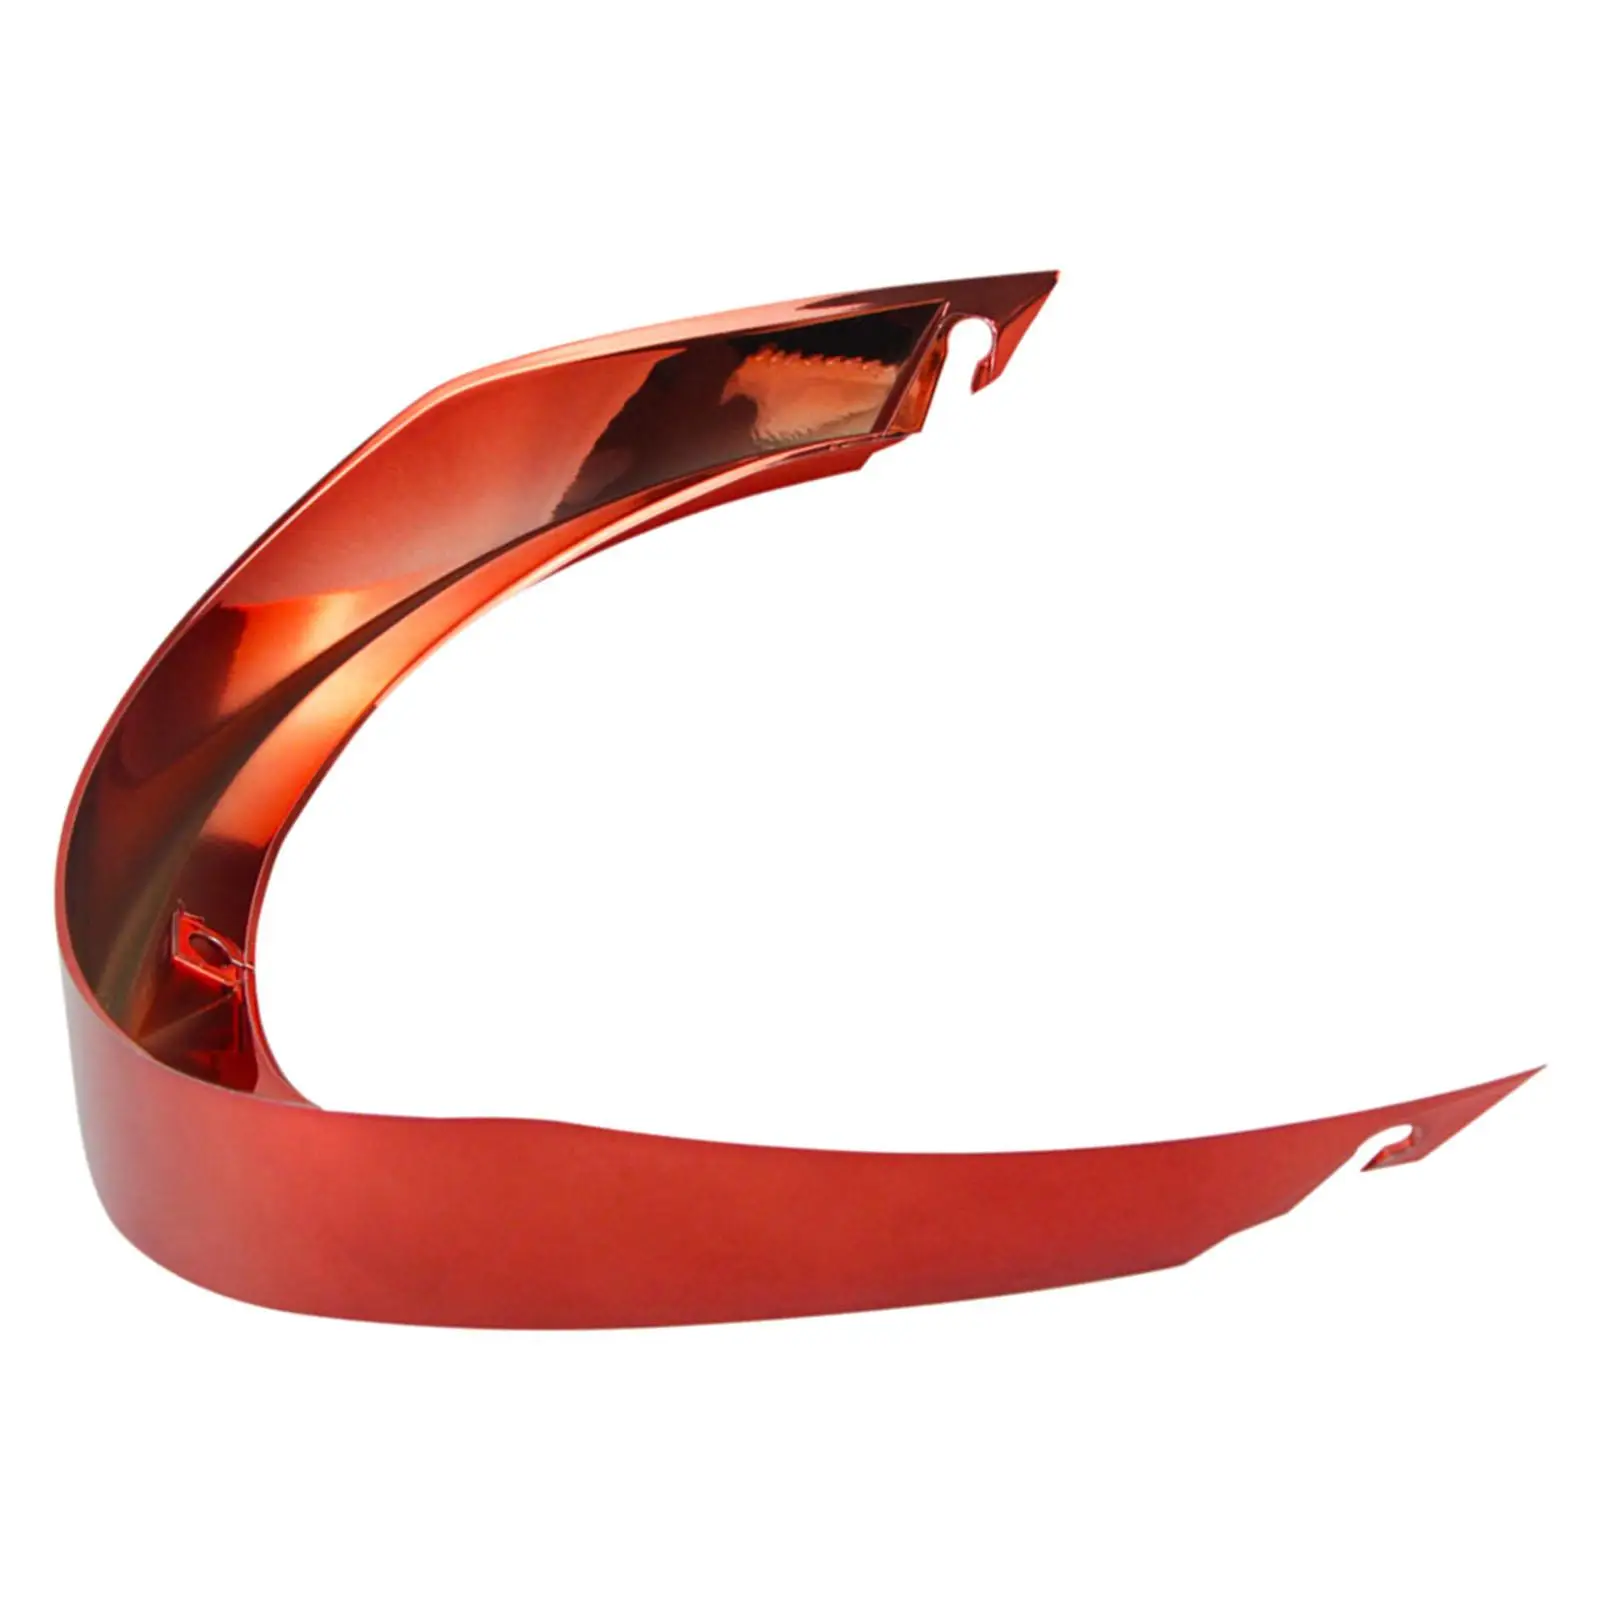  Helmet Big Tail Spoiler Replacement PC Trim for   for Pista